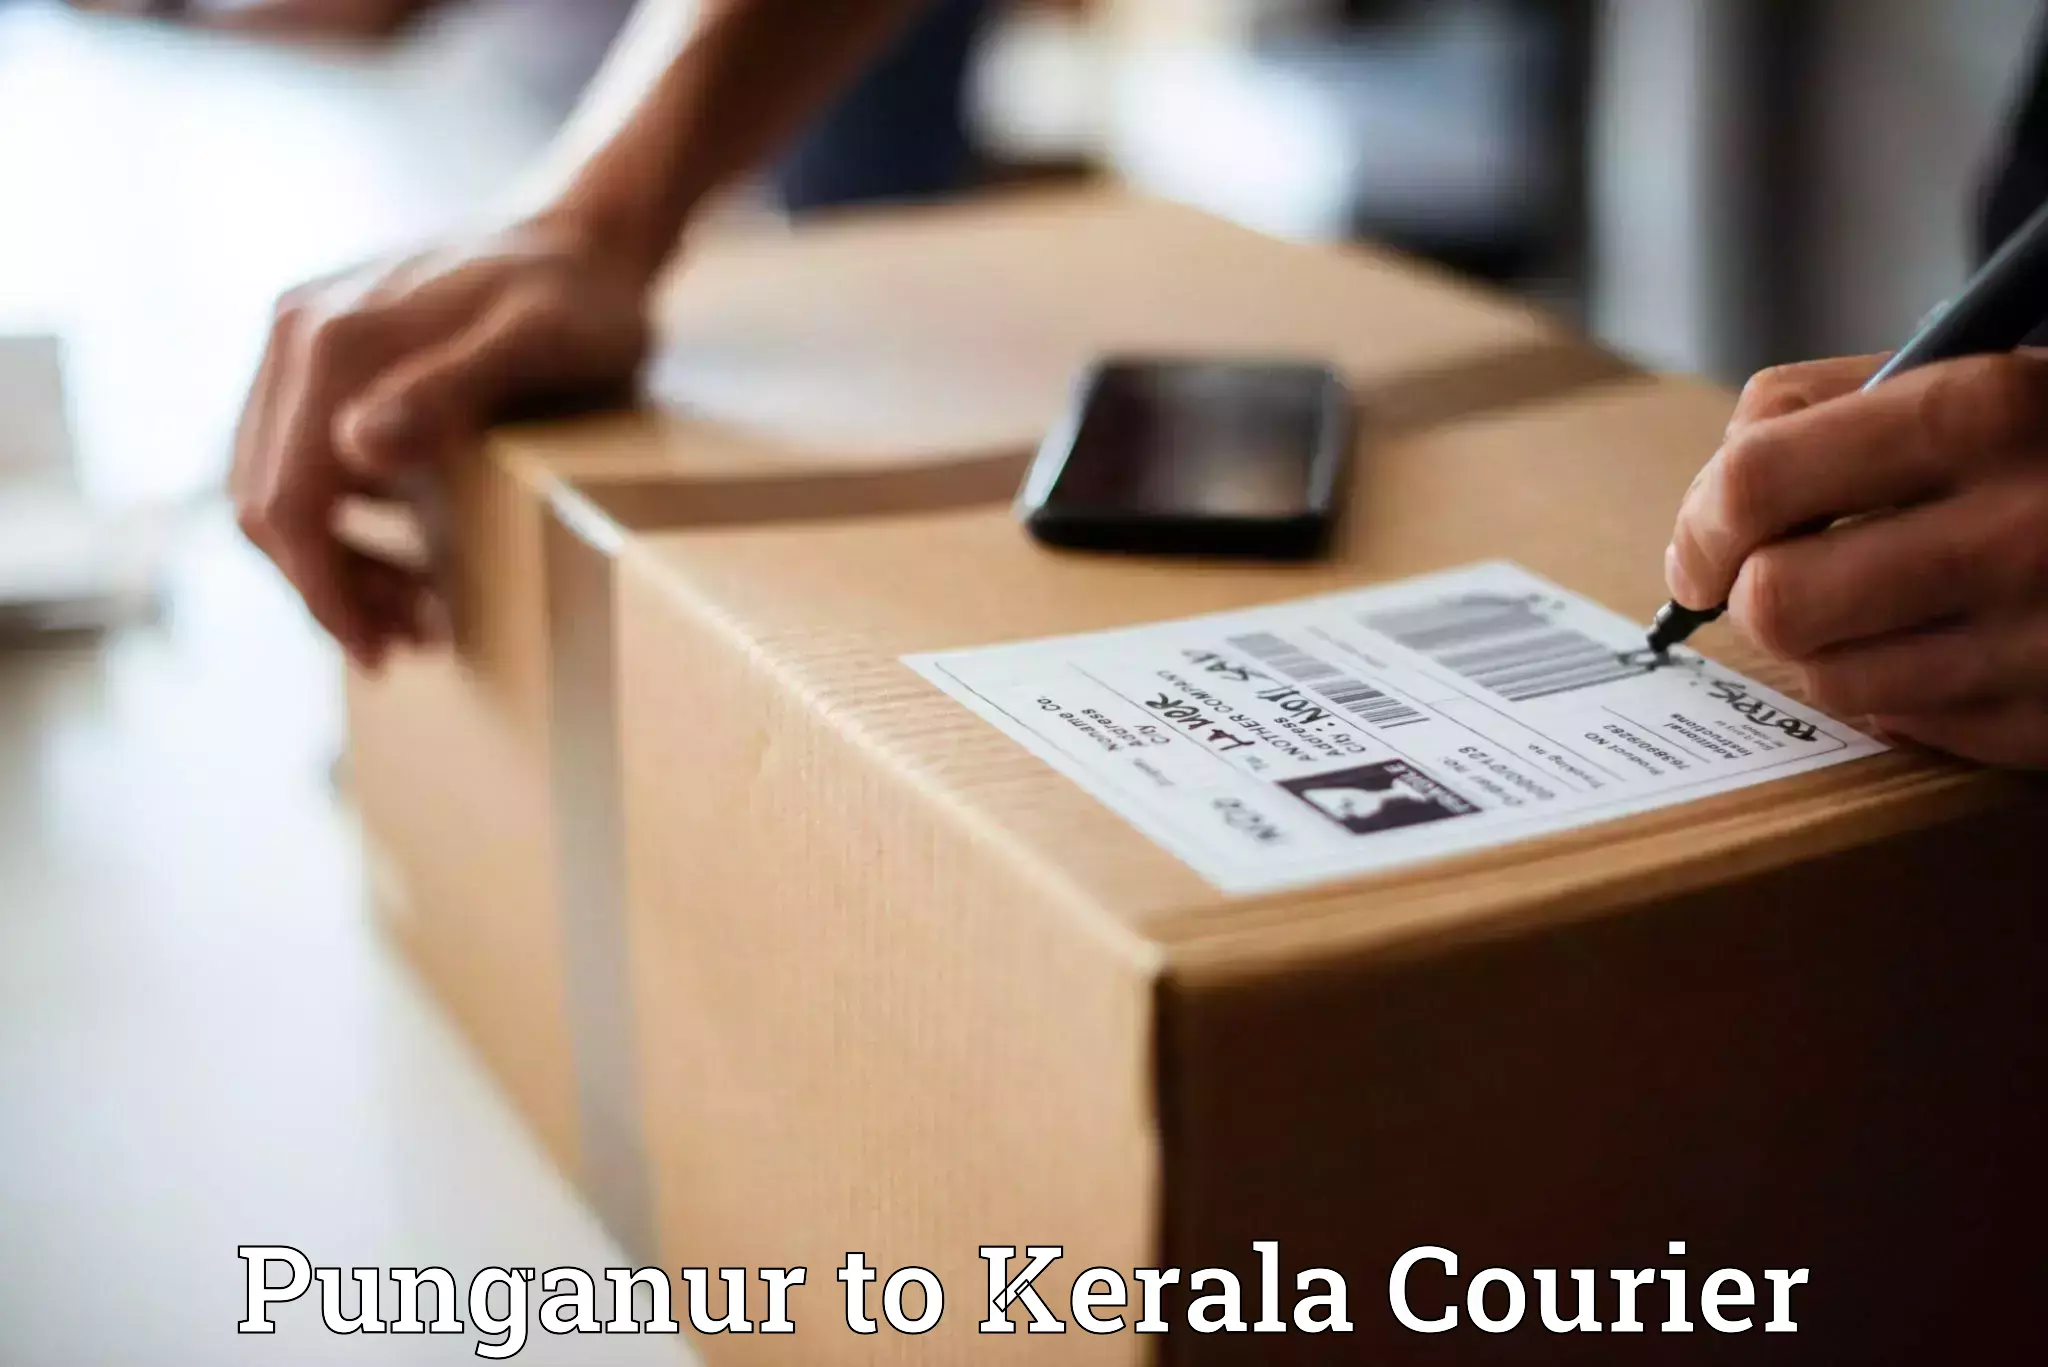 Global shipping solutions Punganur to Kilimanoor